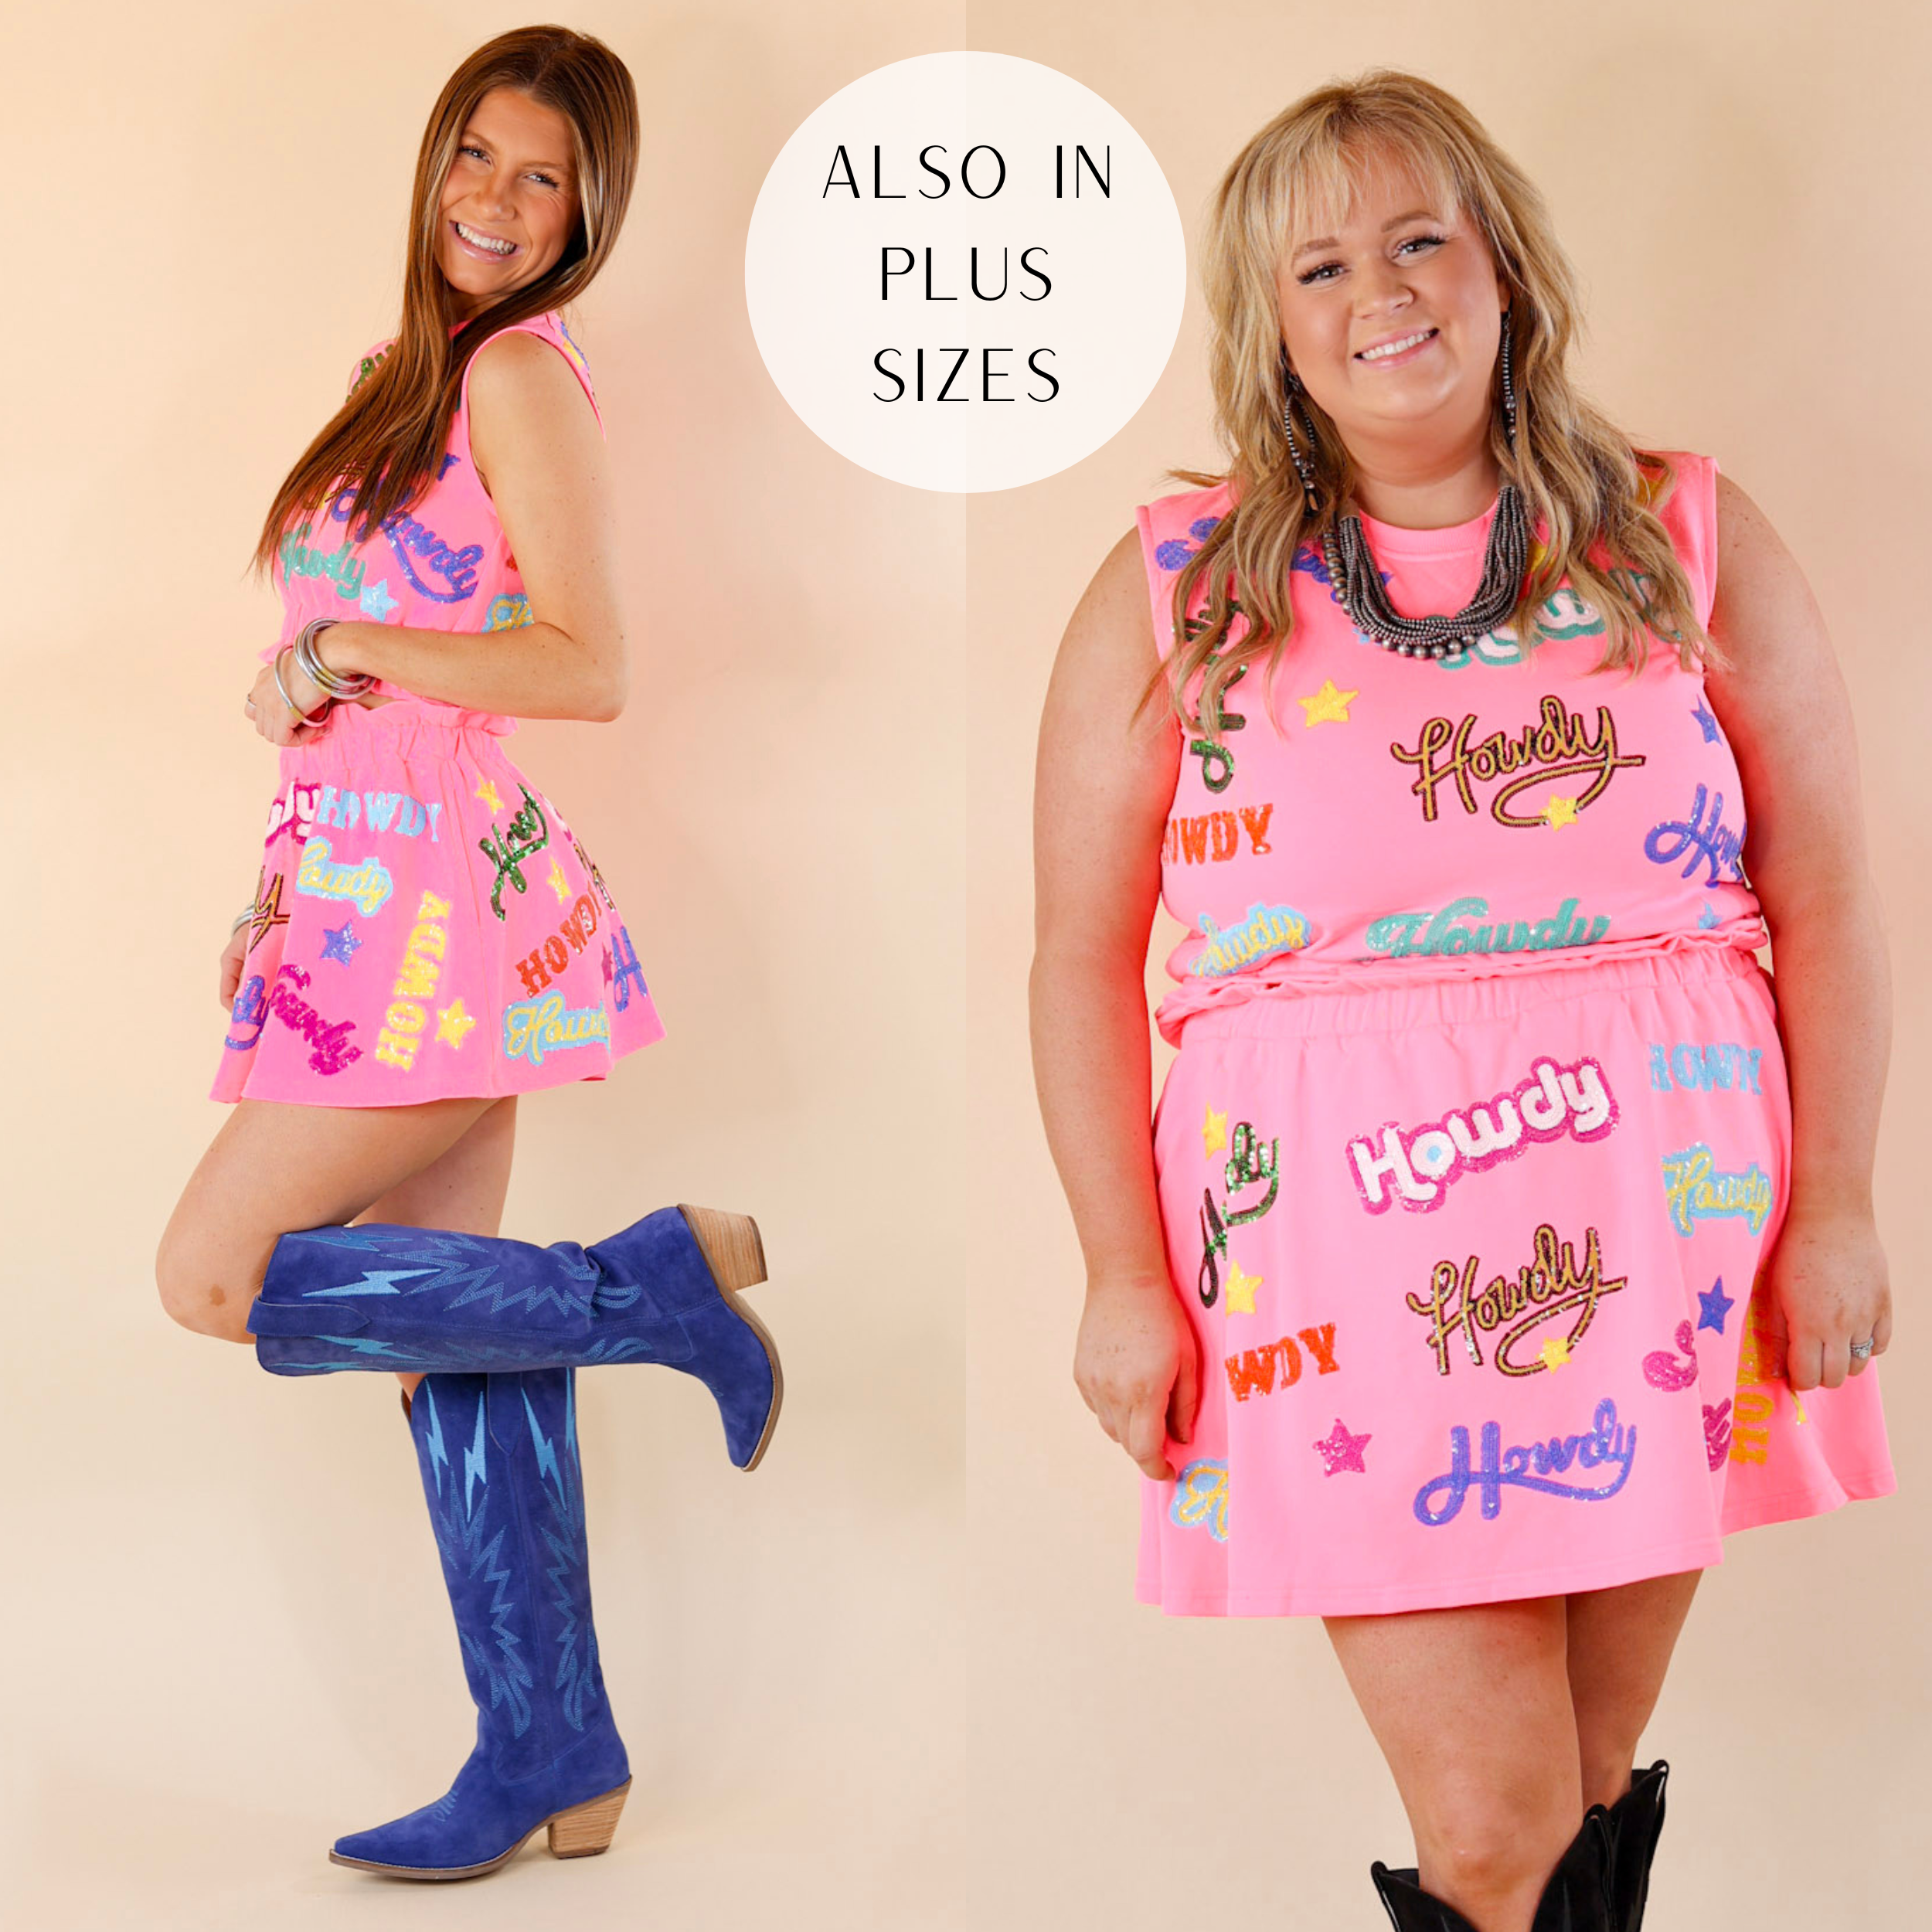 Models are wearing a pink tank top with the word "Howdy" in many colors. Size small has it paired with blue Thunder Road Dingo boots and silver jewelry, and the matching skirt.  Size plus has it paired with black boots, silver jewelry, and the matching skirt. 